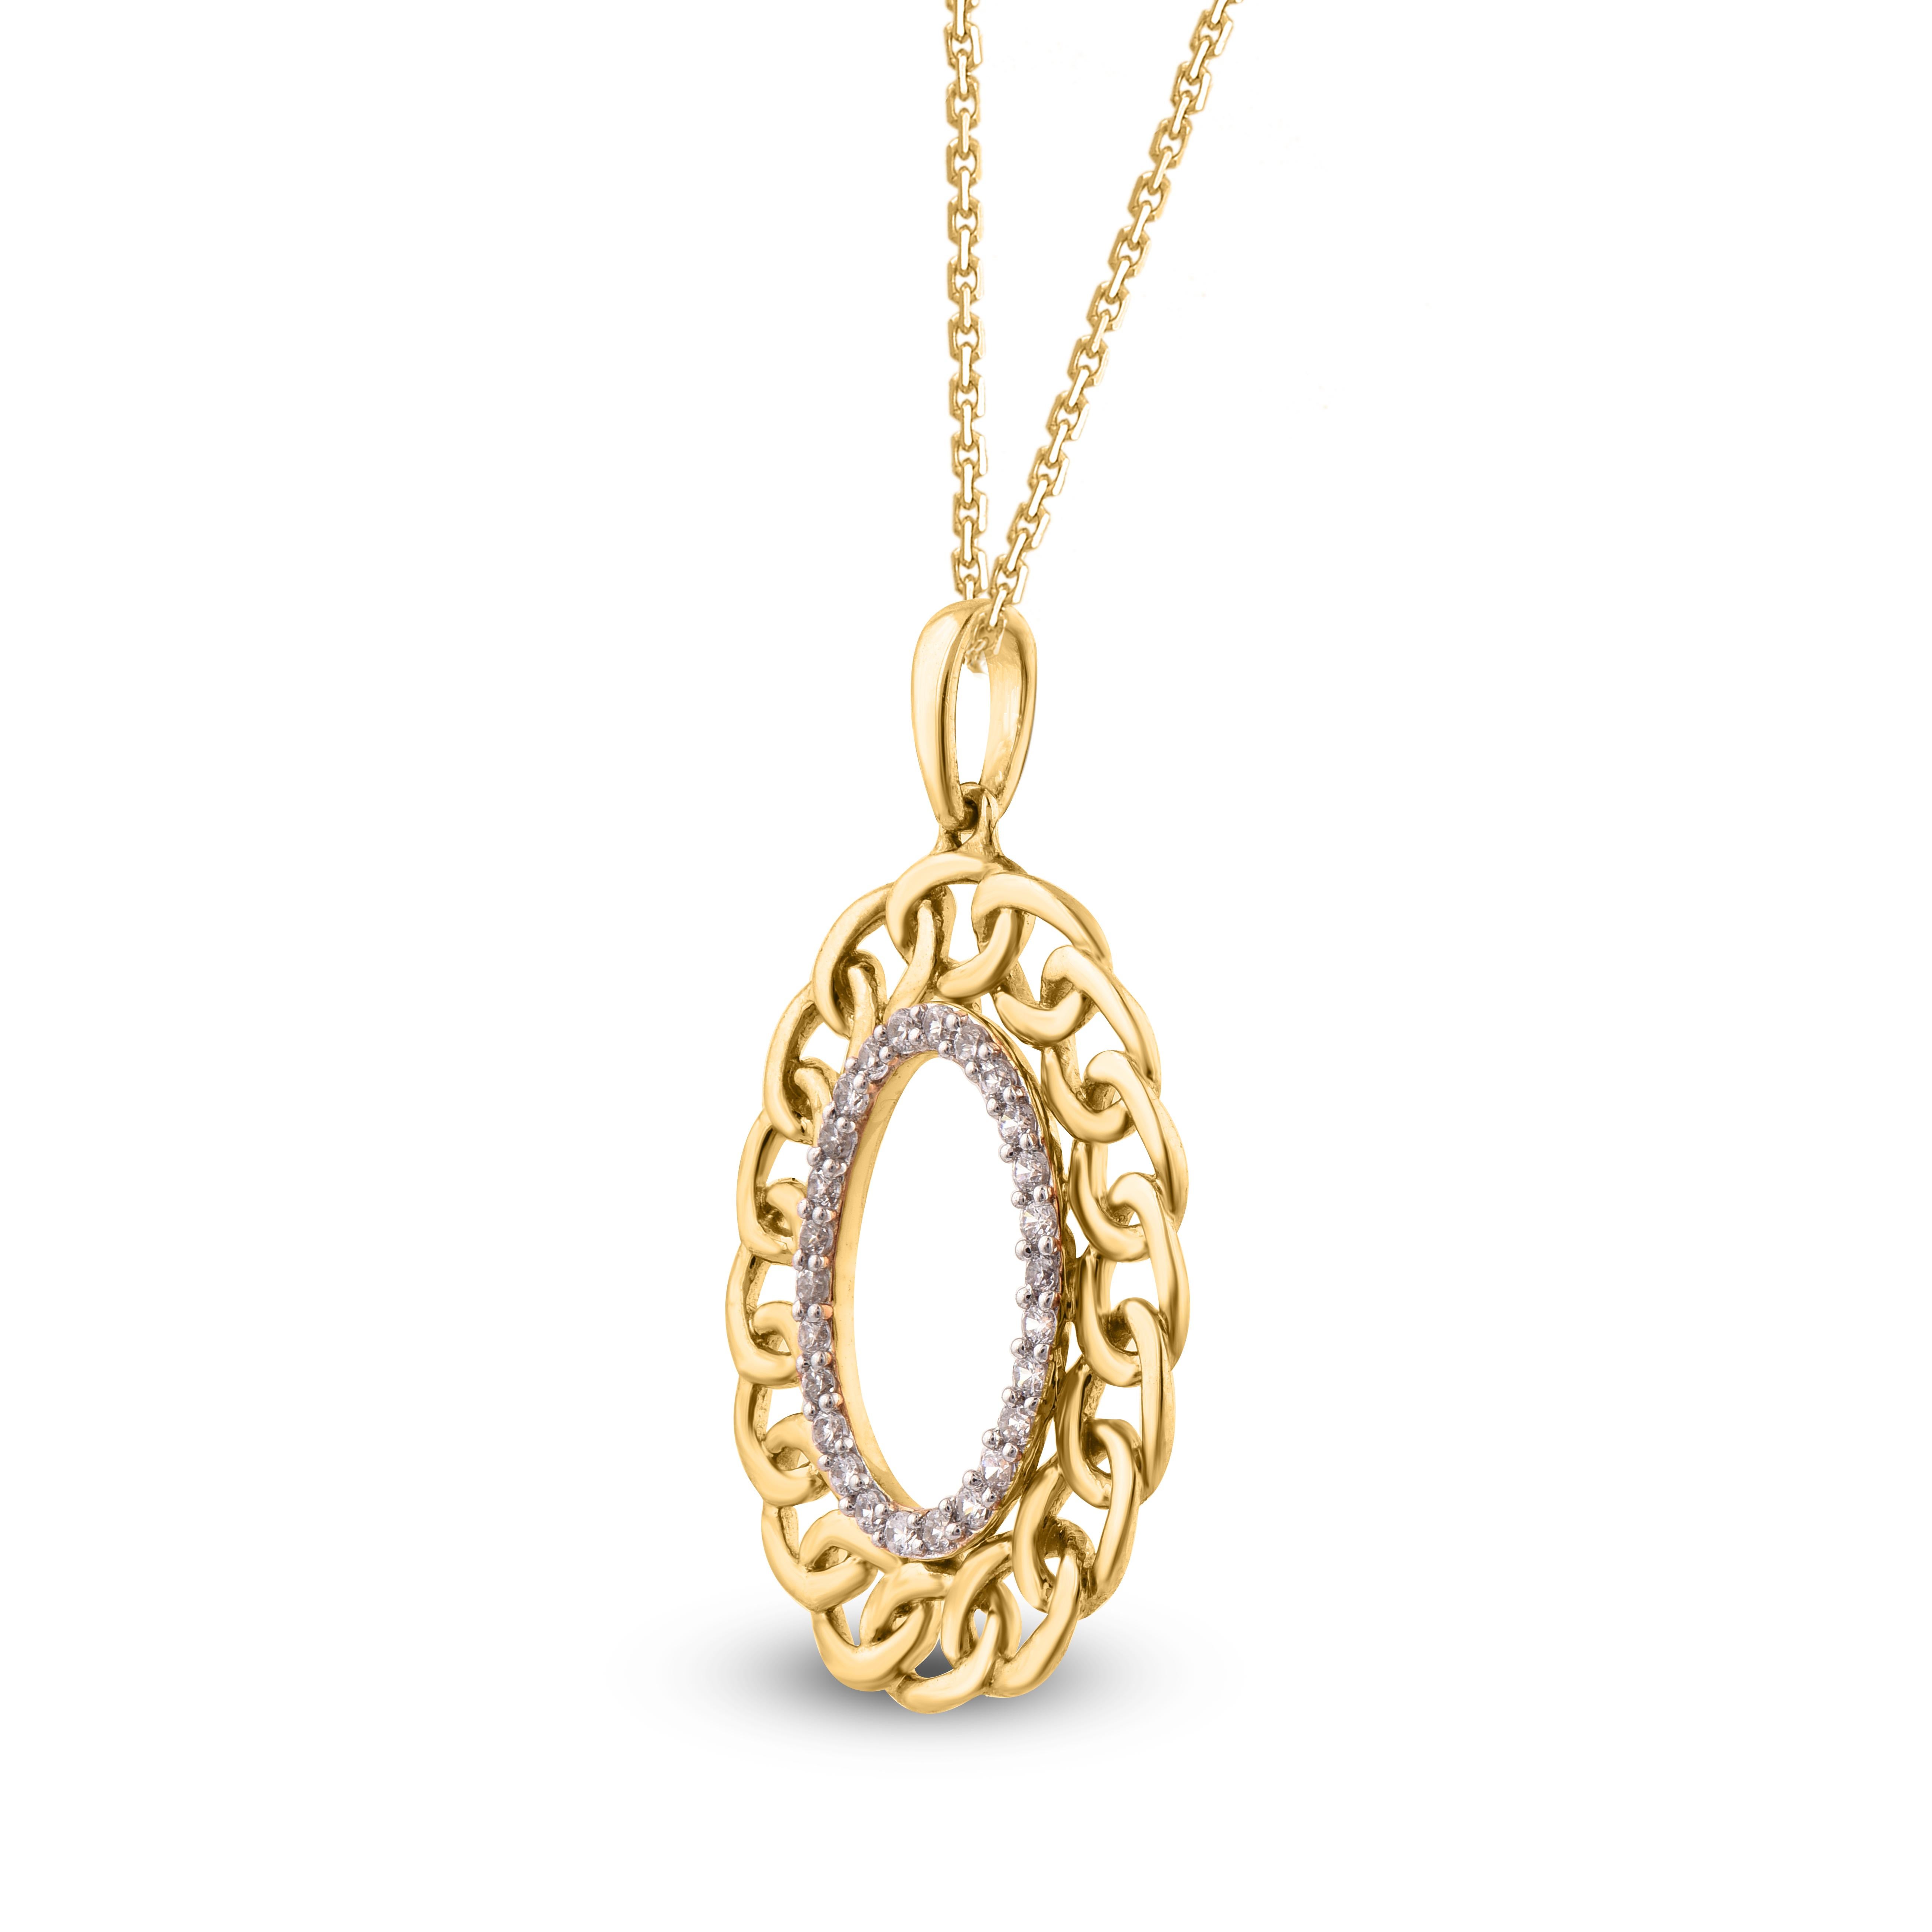 Bring sparkle to your favorite casual or dressy looks with this diamond oval pendant. This diamond pendant is crafted from 14-karat yellow gold and features 26 brilliant cut diamonds set in prong setting. H-I color I2 clarity and a high polish